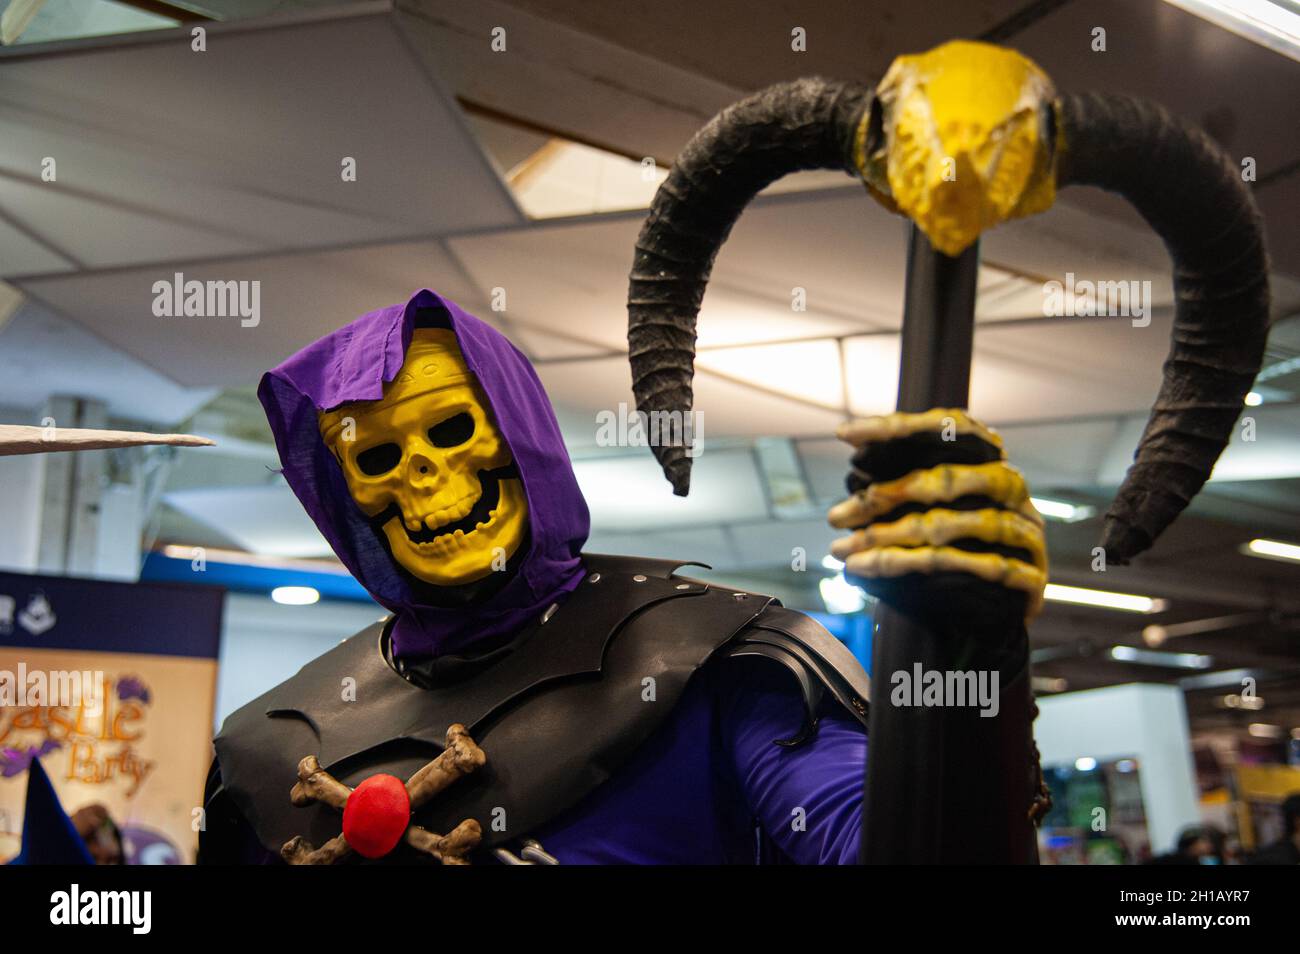 A fan of Hee-Man poses for a photo using a costume of Skeletor during the fourth day of the SOFA (Salon del Ocio y la Fantasia) 2021, a fair aimed to the geek audience in Colombia that mixes Cosplay, gaming, superhero and movie fans from across Colombia, in Bogota, Colombia on October 17, 2021. Stock Photo